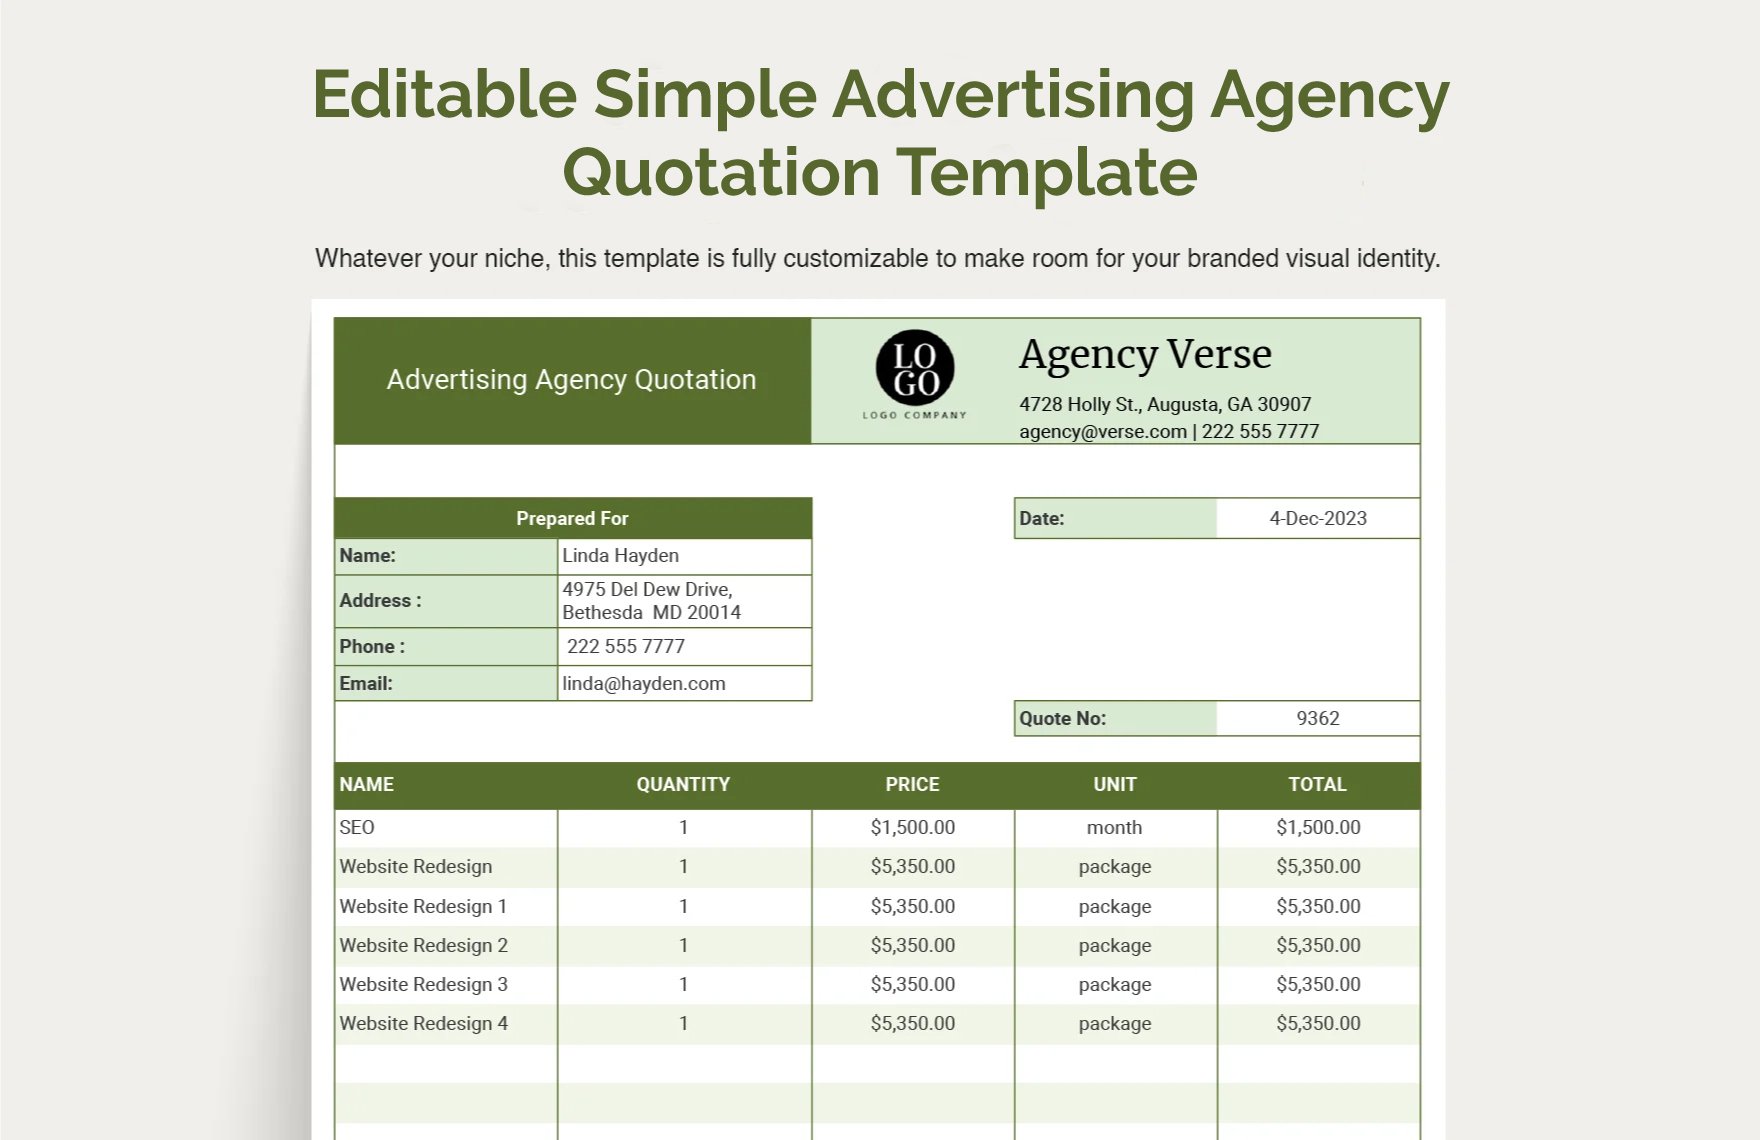 Free Editable Simple Advertising Agency Quotation Template in Word, Google Docs, Excel, Google Sheets